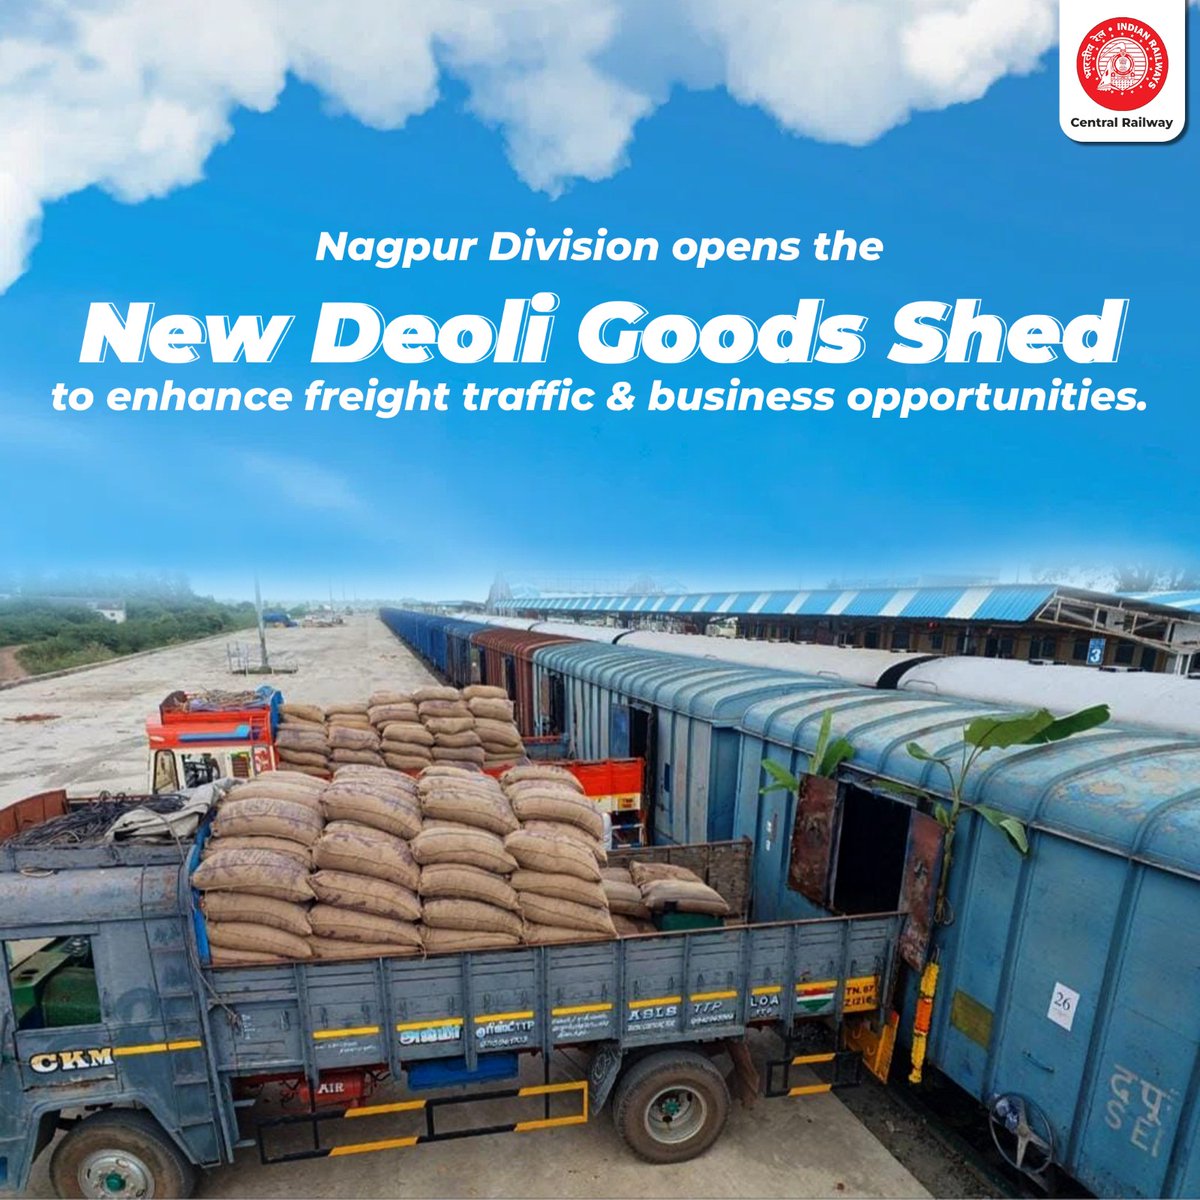 🚂📦Central Railway, Nagpur Division expands freight capabilities with the new Deoli Goods Shed. With developments like the Wardha-Nanded line and the upcoming Gati Shakti Cargo Terminal, connectivity and trade prospects soar in the region. 🚂✨ #RailwayDevelopment 
#TradeGrowth